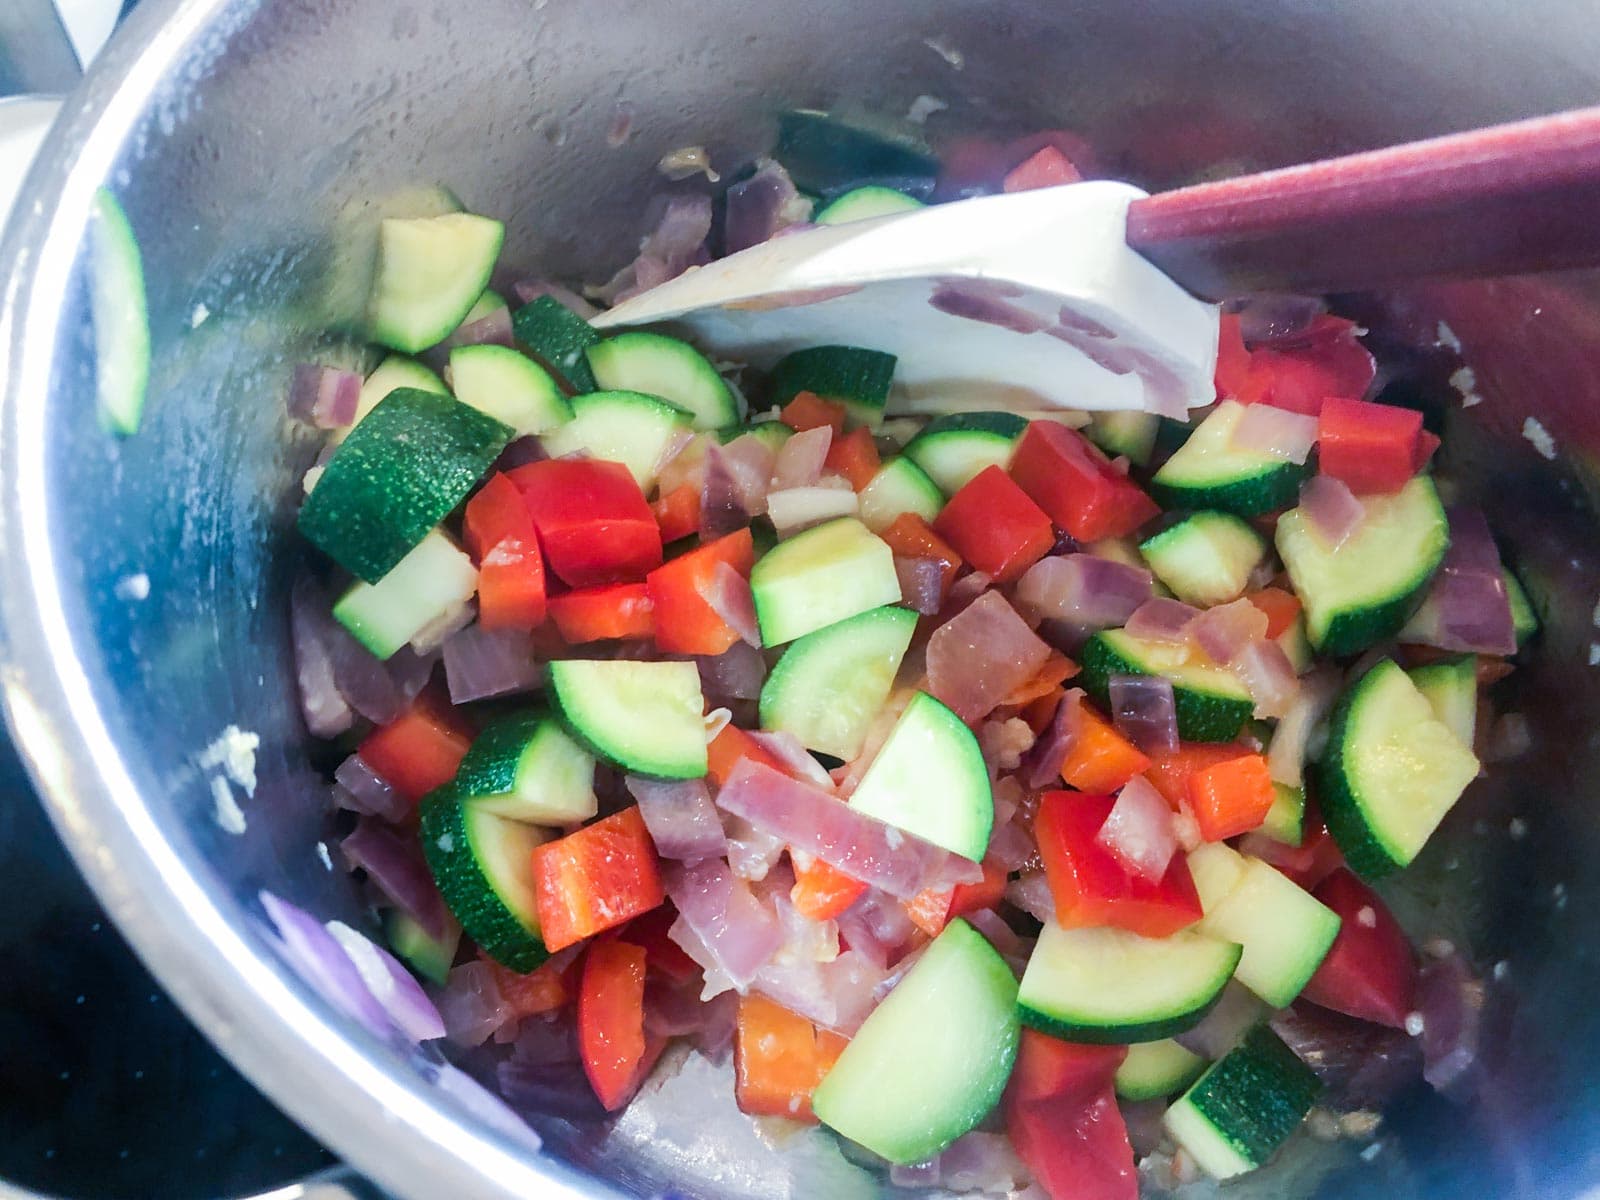 Diced red pepper, courgettes and garlic added to sauteed red onions.